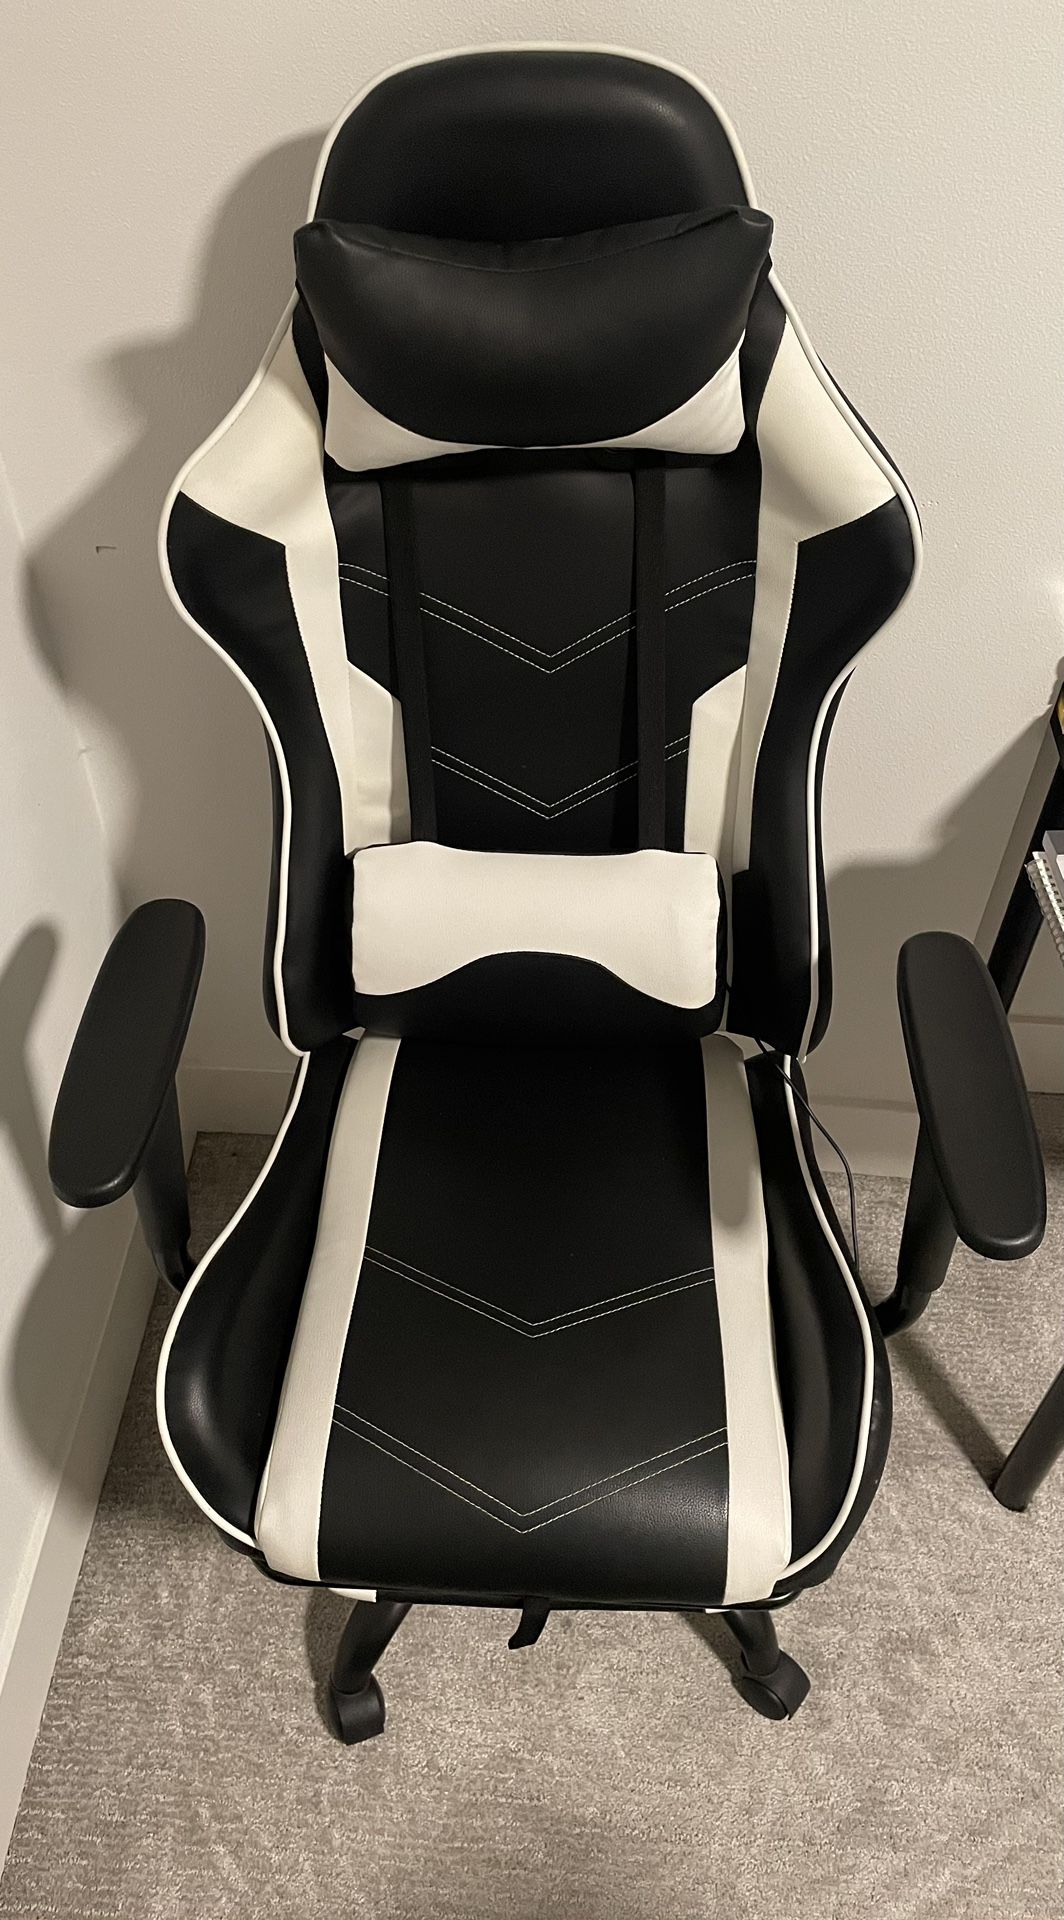 Racing Style Office Chair, Full Size